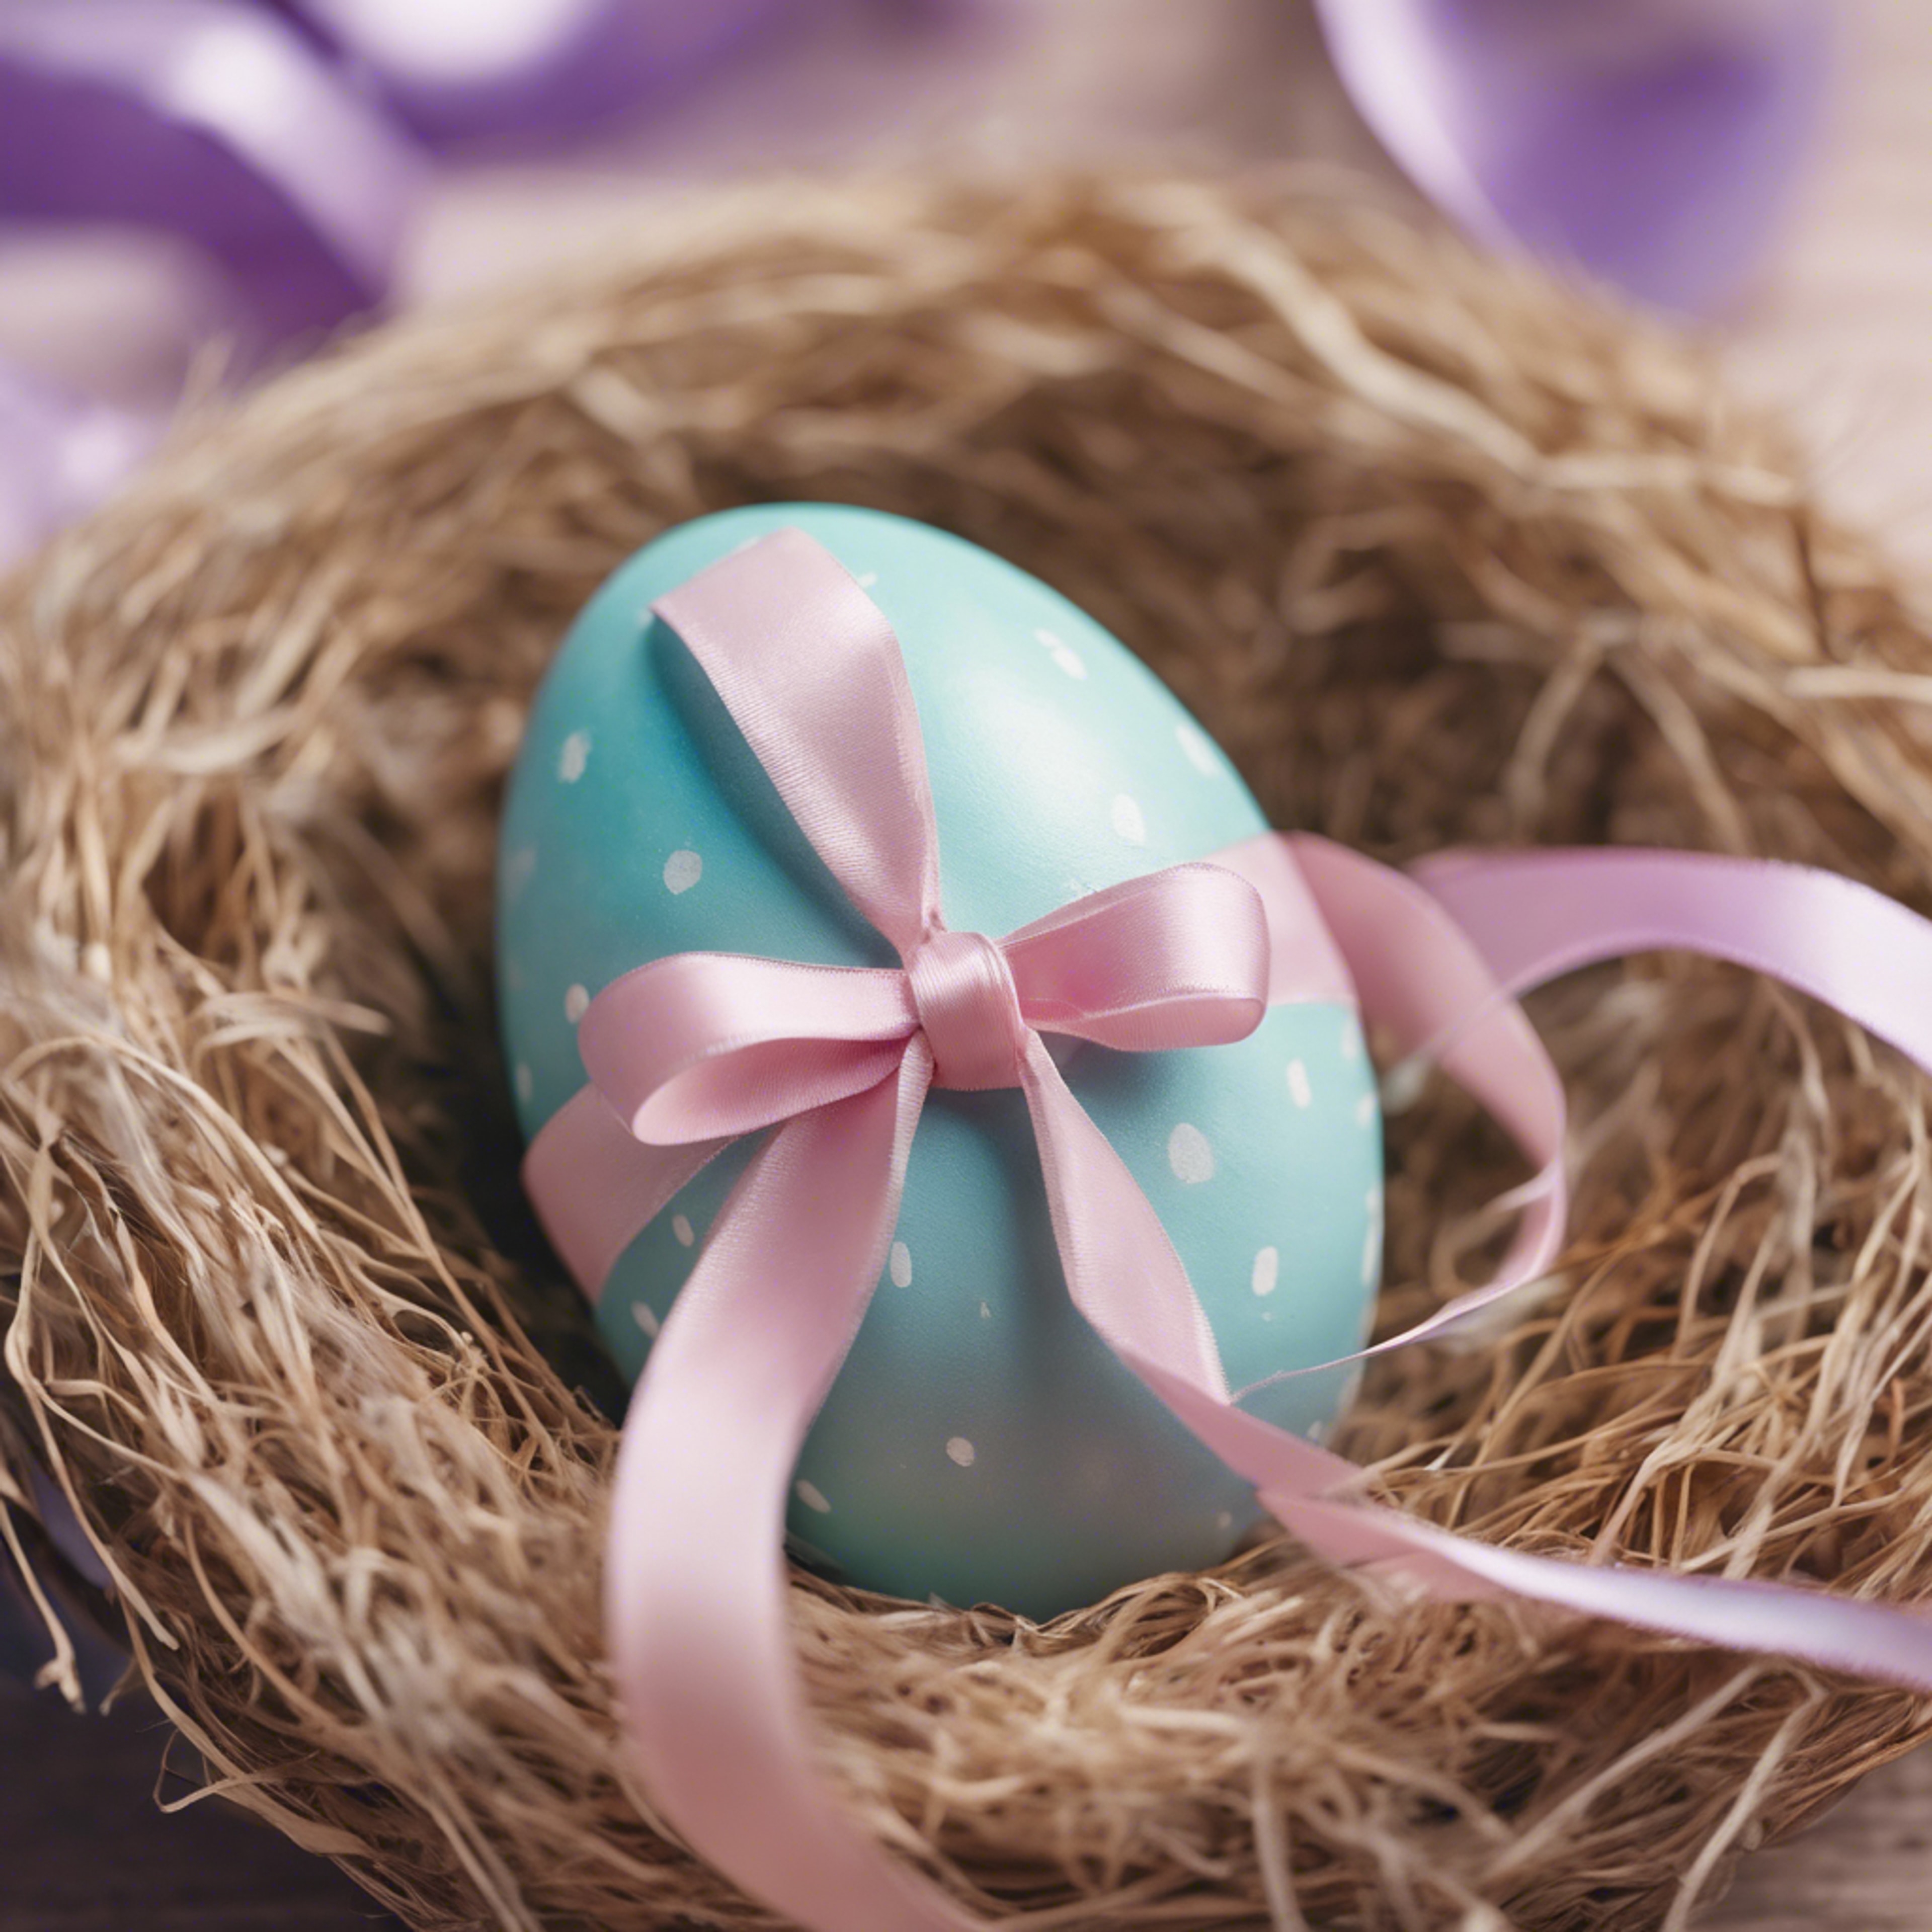 Close-up image of a pastel-colored Easter egg with ribbon details, on a nest. Tapet[582f95aee8b94a49b4e5]